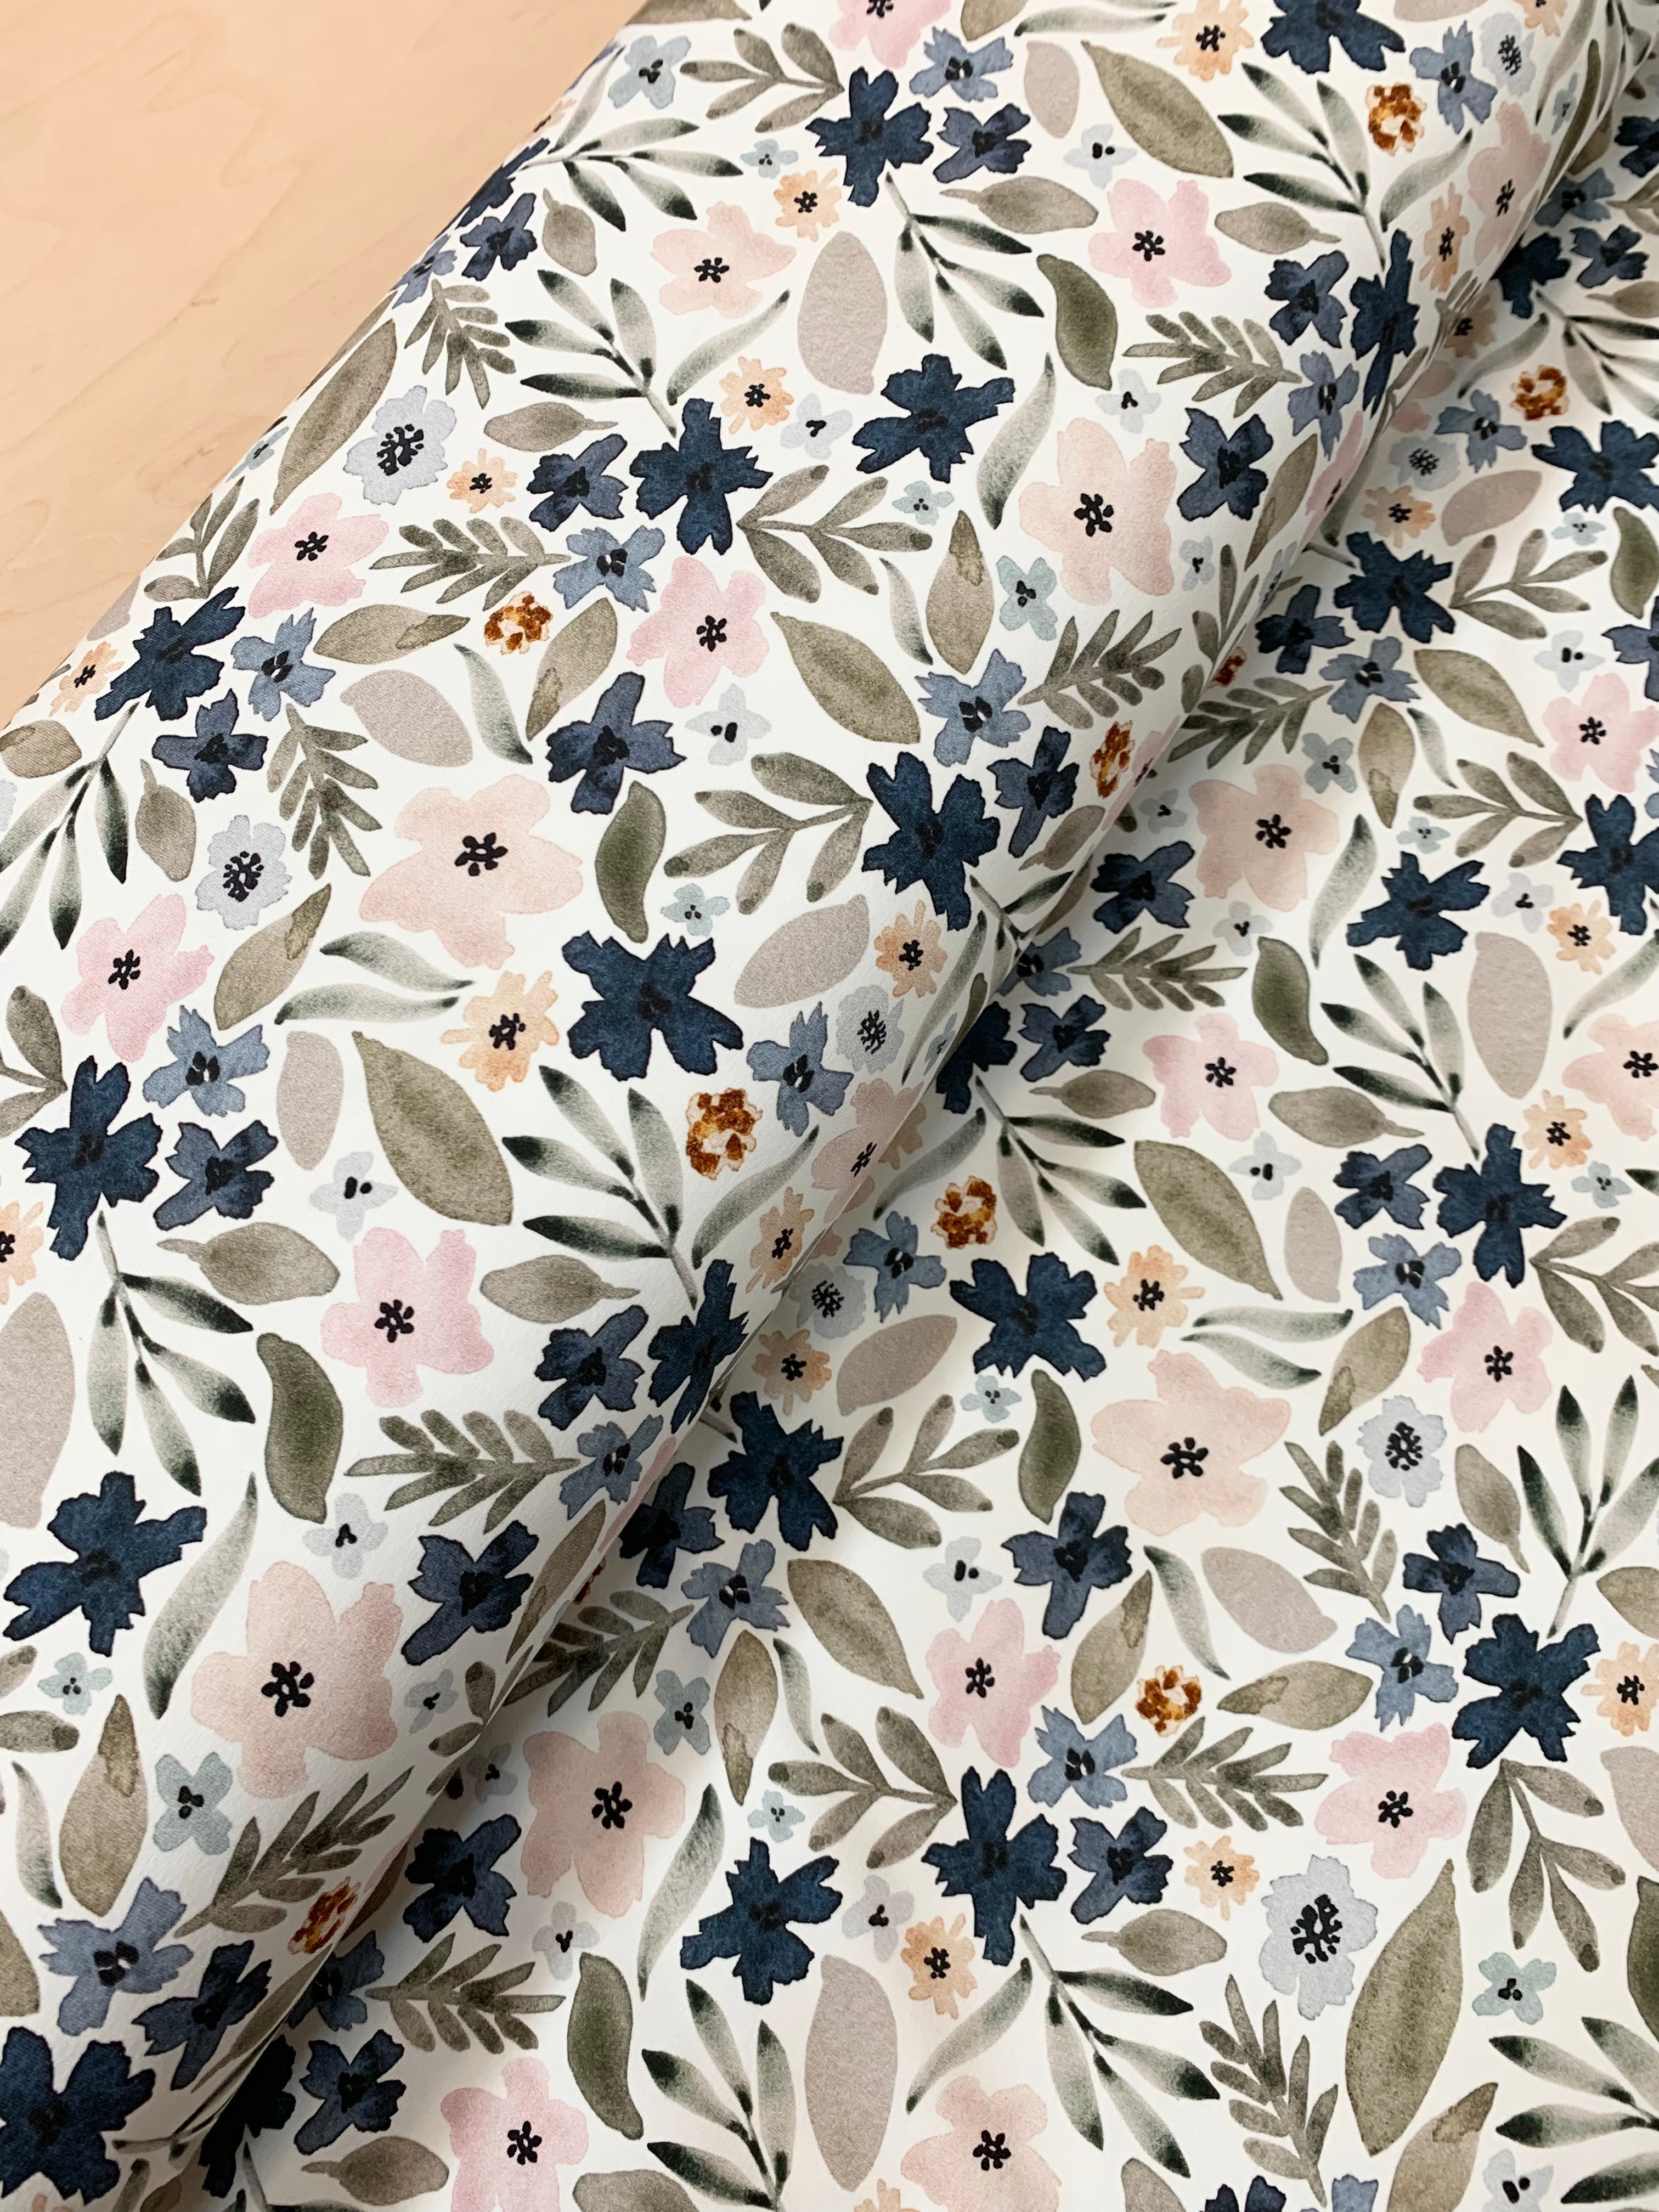 PRE ORDER Indigo floral Cotton Jersey Fabric - DUE IN STOCK EARLY MAY